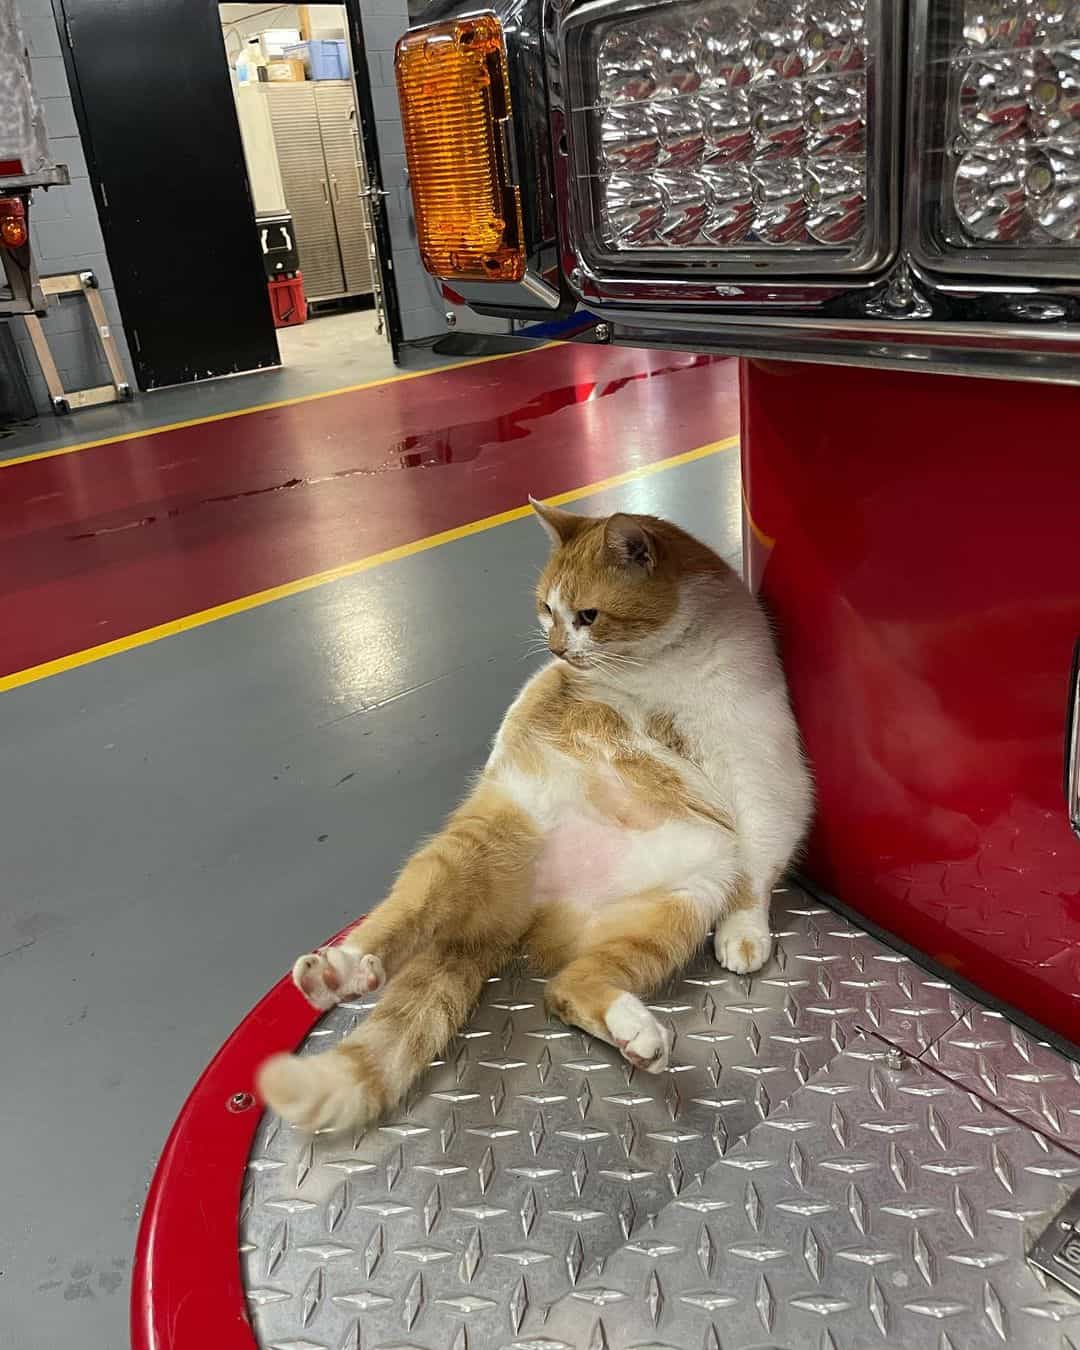 the cat is sitting on its back leaning against the fire engine